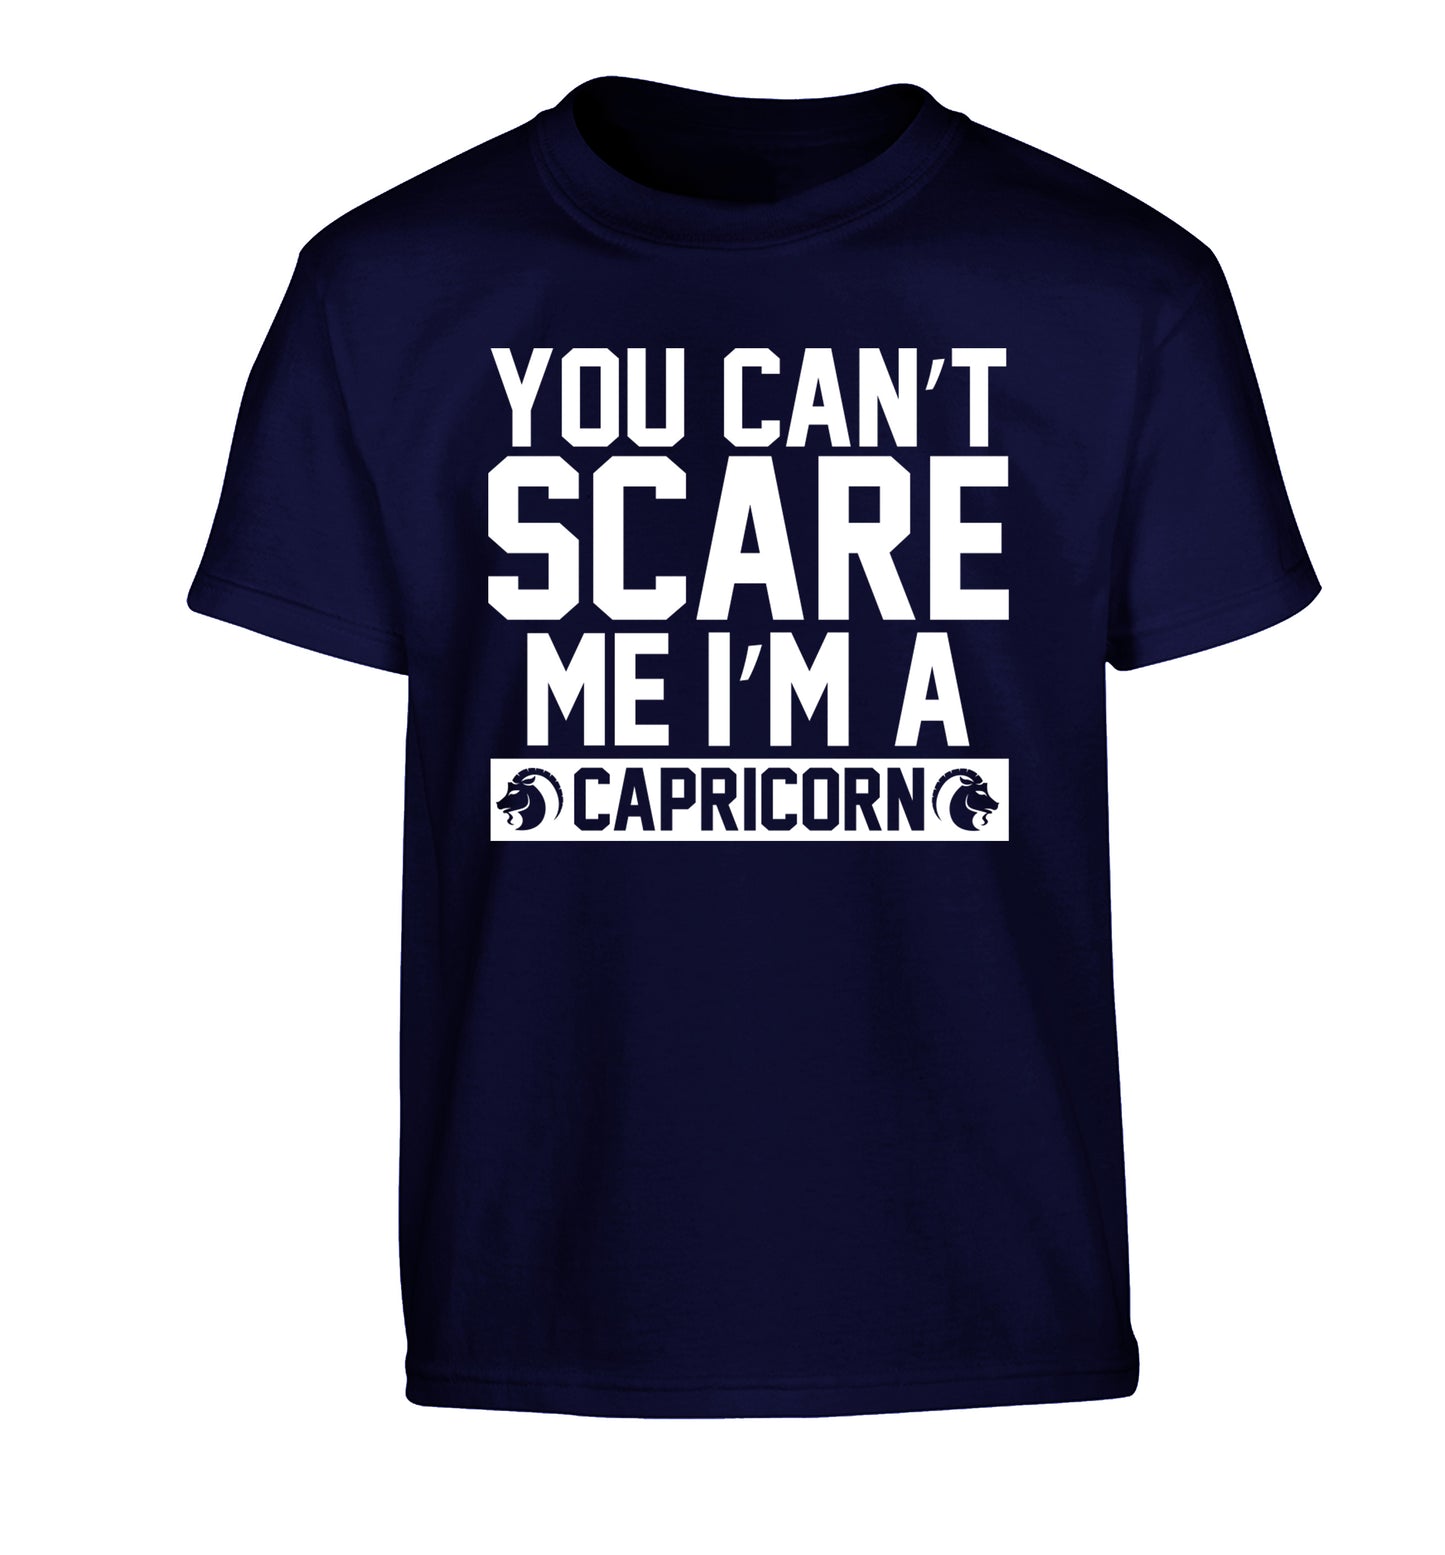 You can't scare me I'm a capricorn Children's navy Tshirt 12-13 Years